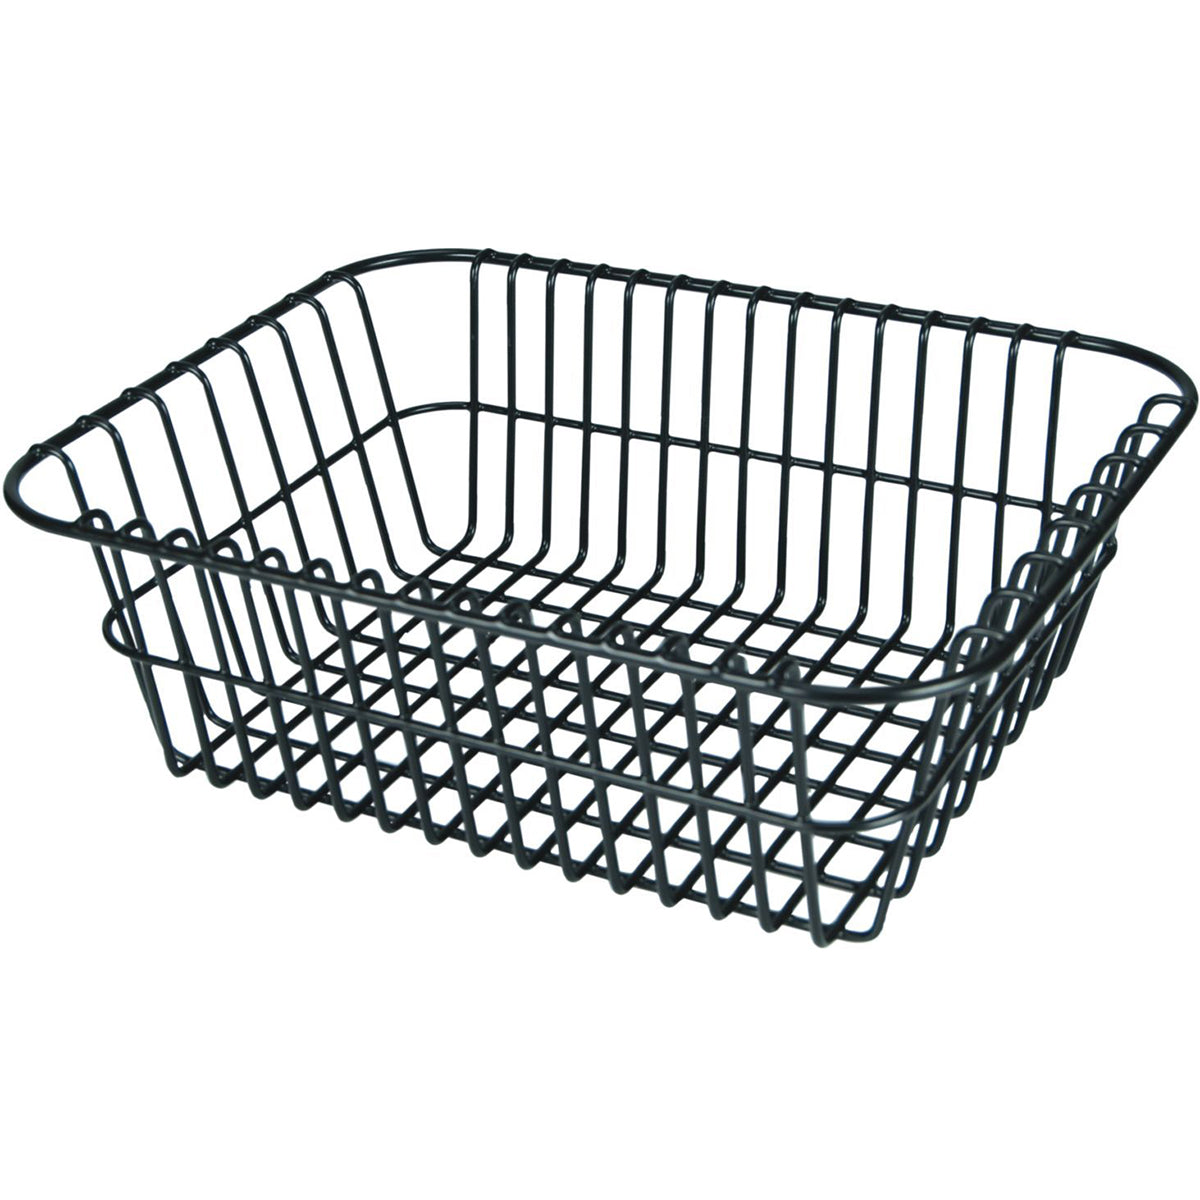 IGLOO Wire Basket for 70, 72, and 94 qt. Non-Rotomold Coolers - Black IGLOO